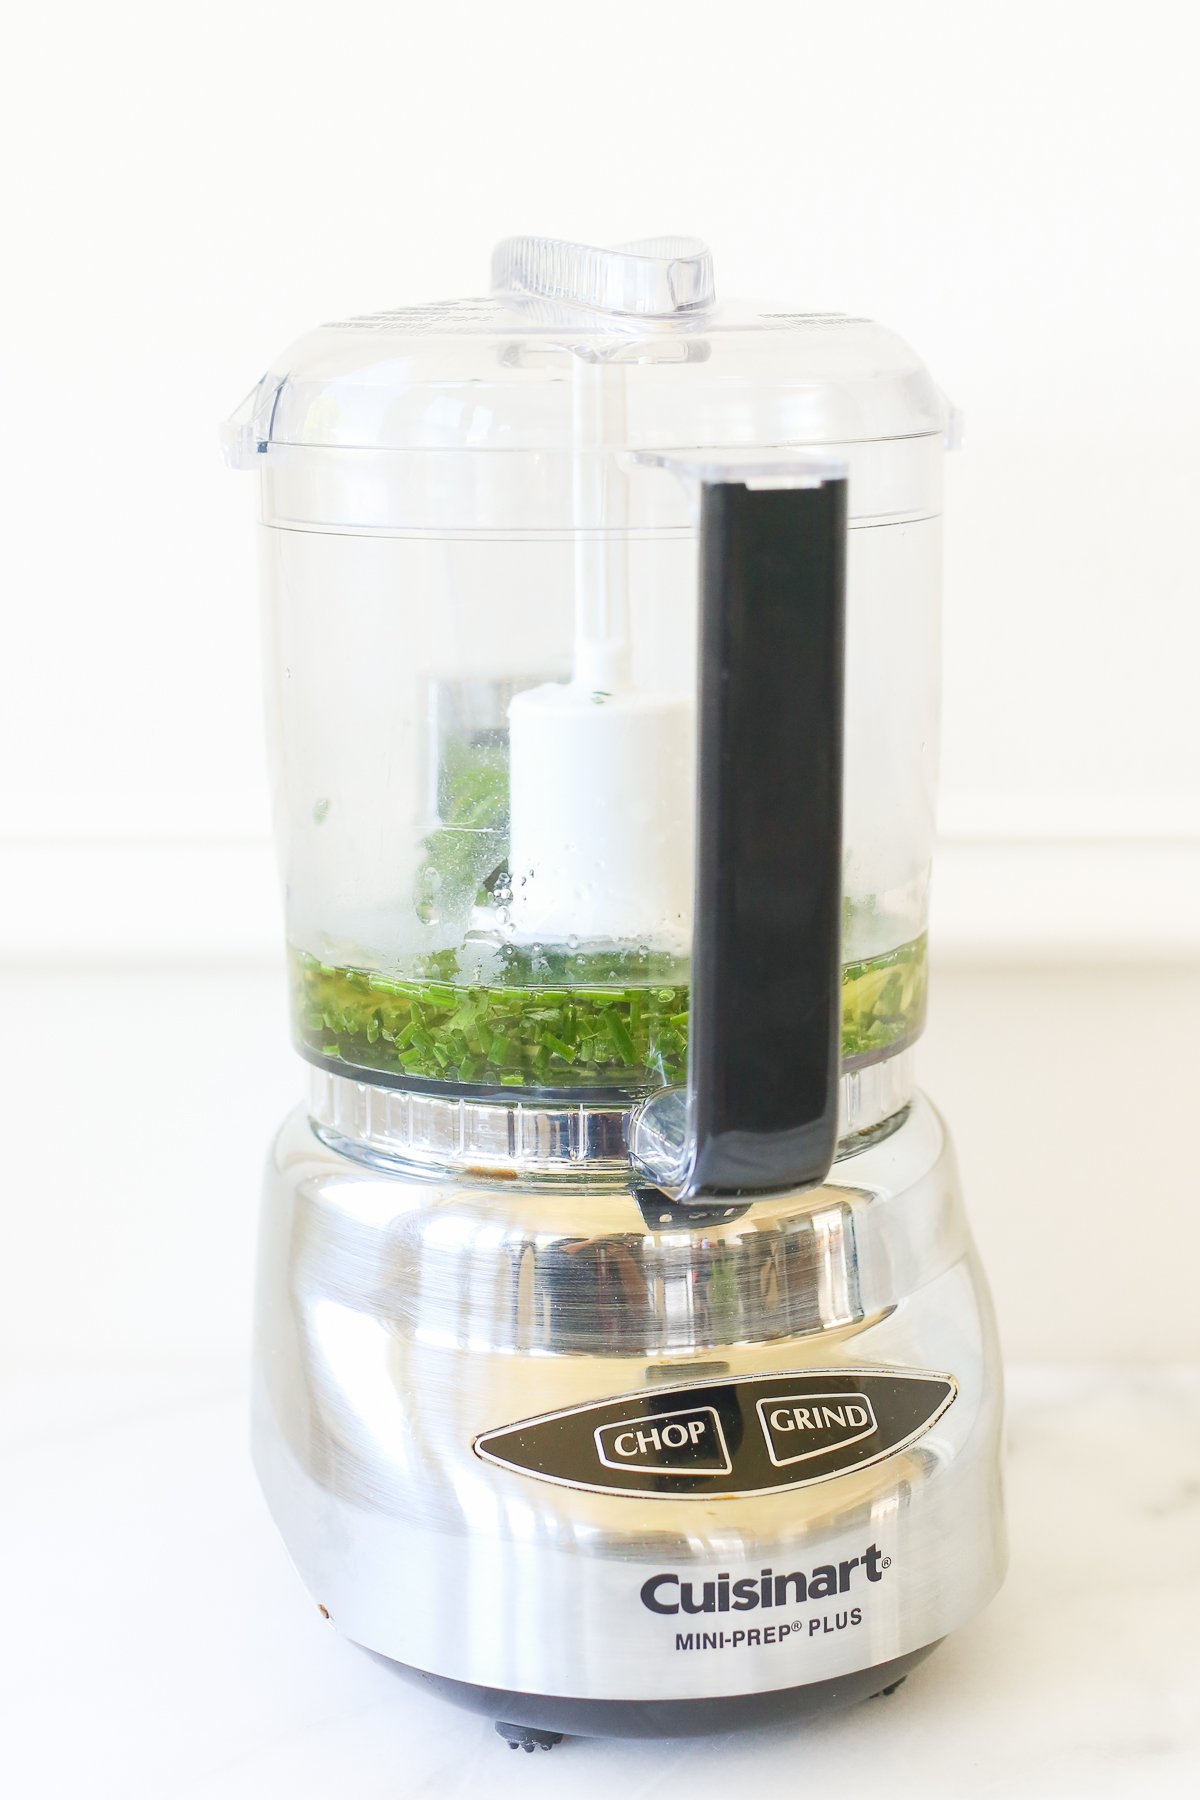 A cuisinart mini-prep plus kitchen gadget with leafy greens inside.